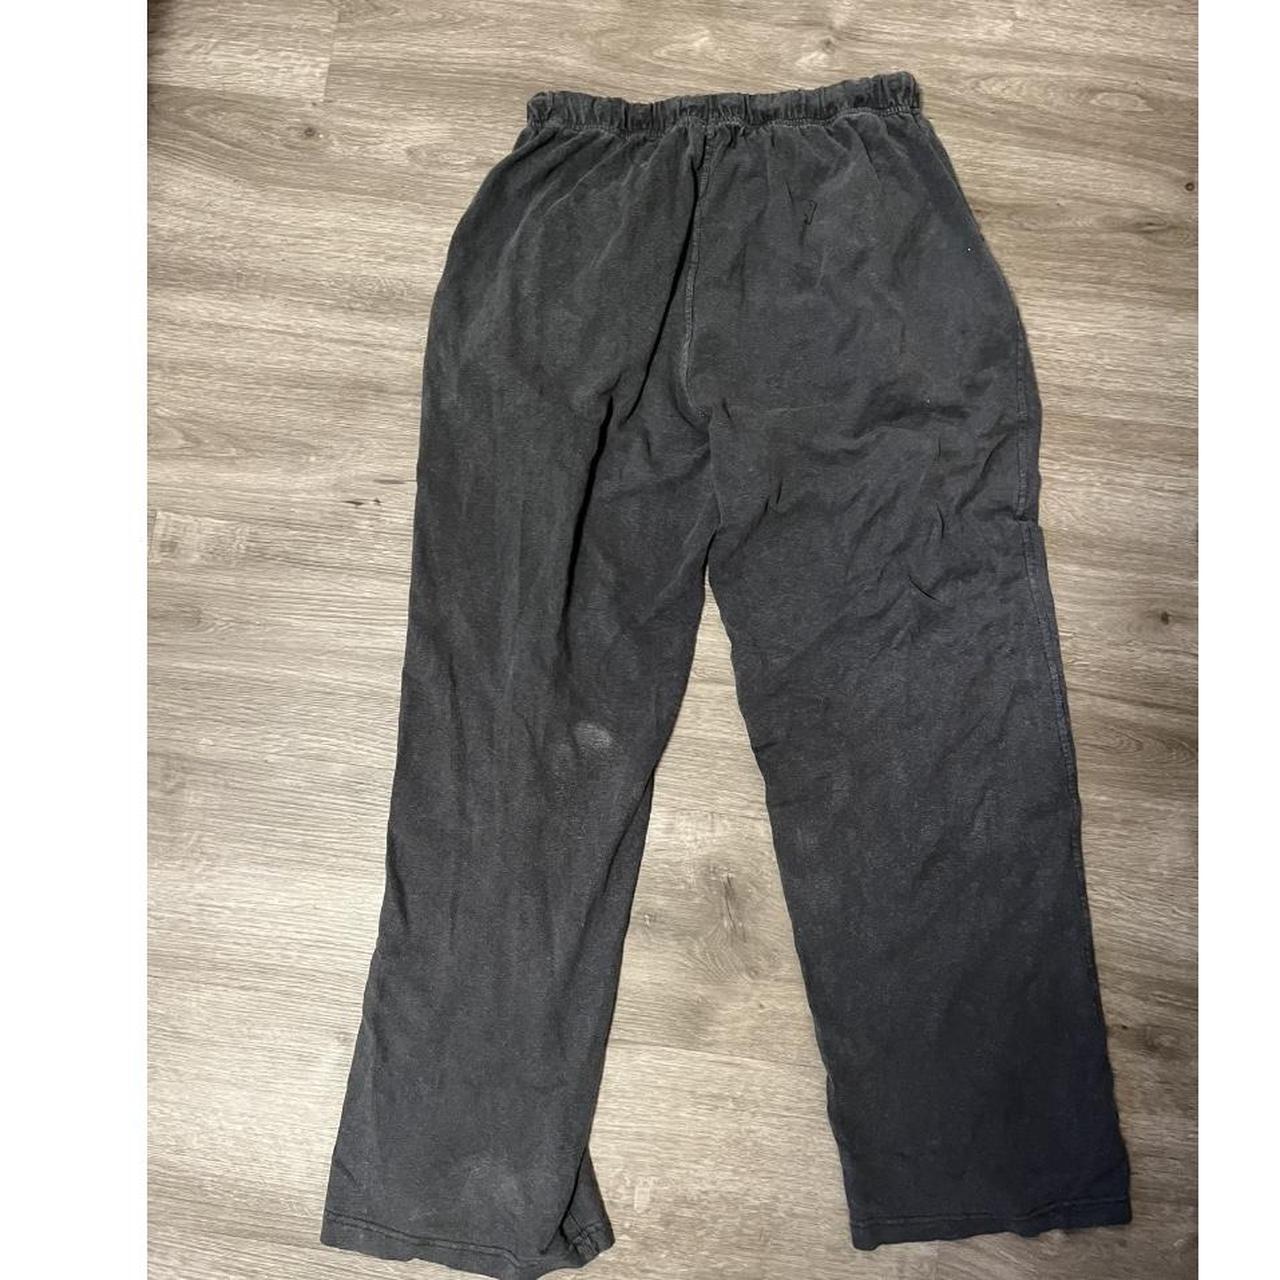 American Vintage Women's Grey and Black Trousers (2)